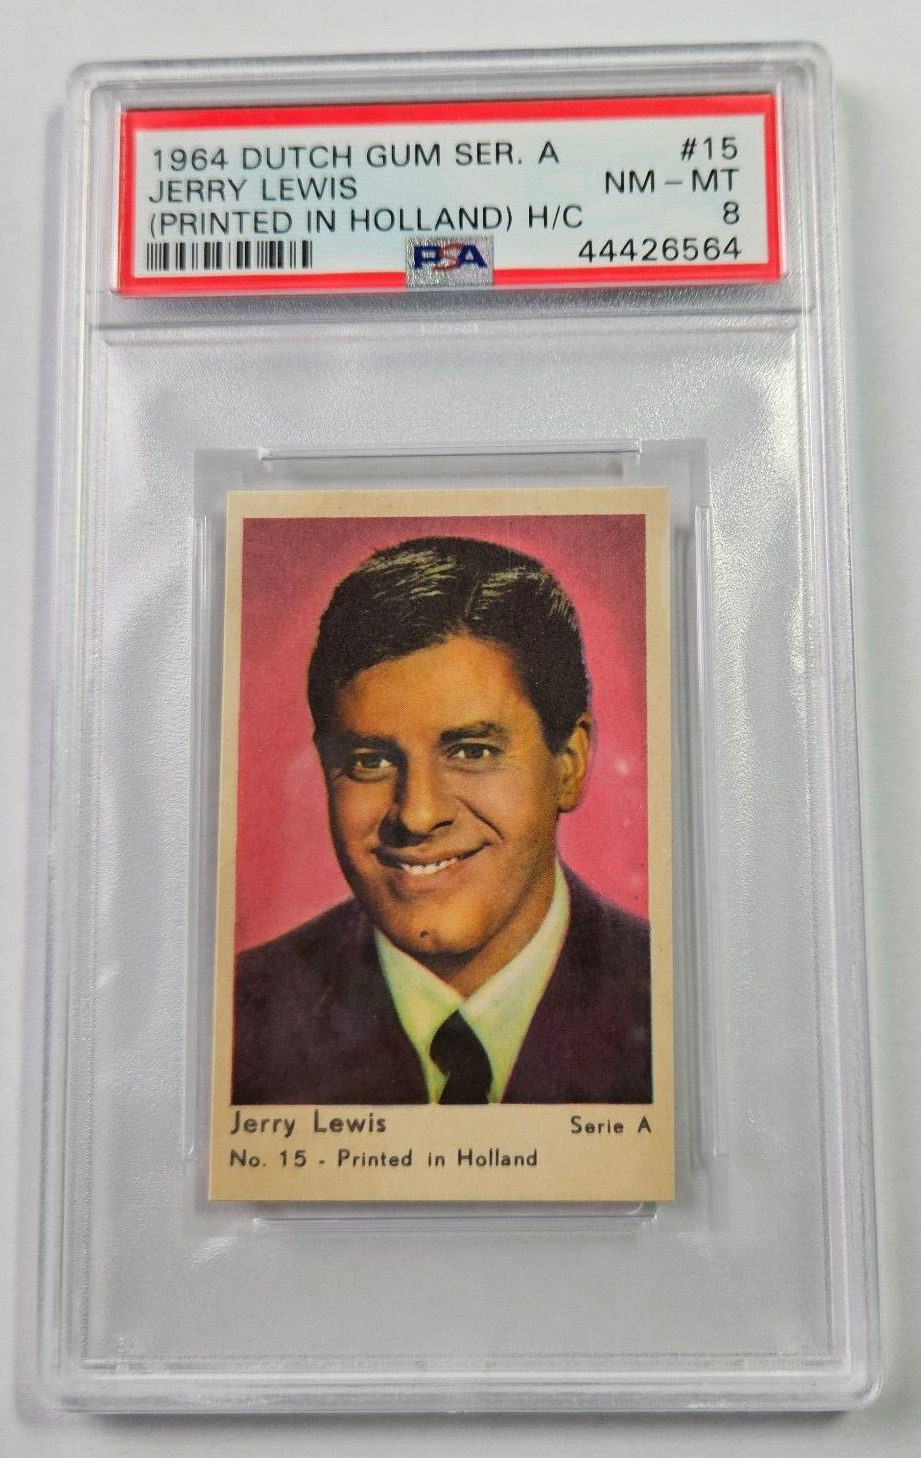 1964 DUTCH GUM Serie A #15 JERRY LEWIS - PSA 8 NM-MT  ONLY 1 GRADED HIGHER (A)